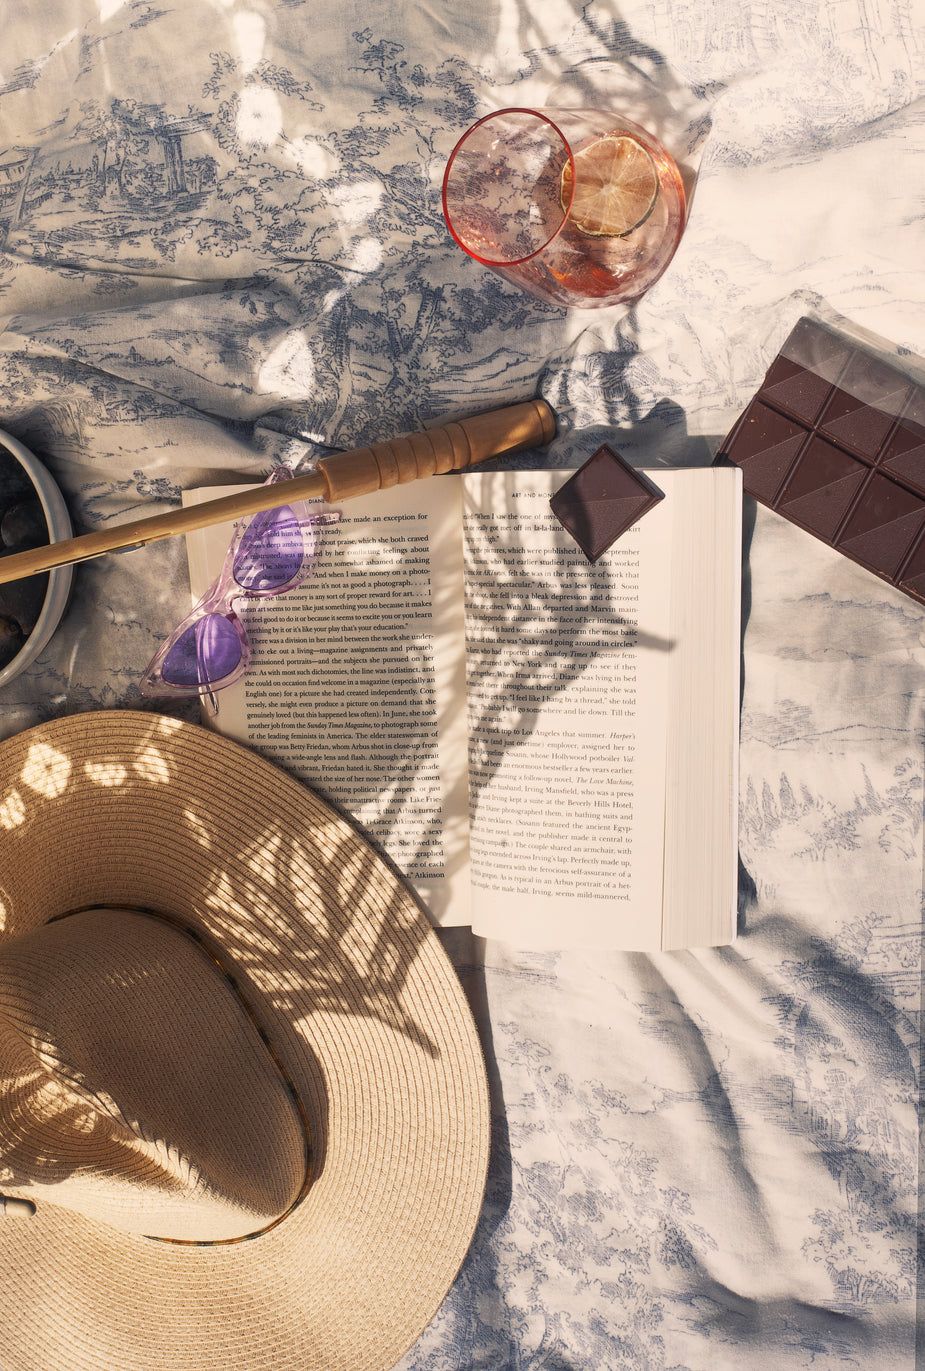 Browse Free HD Image of Flatlay Of A Picnic In The Shadow Of A Lace Umbrella